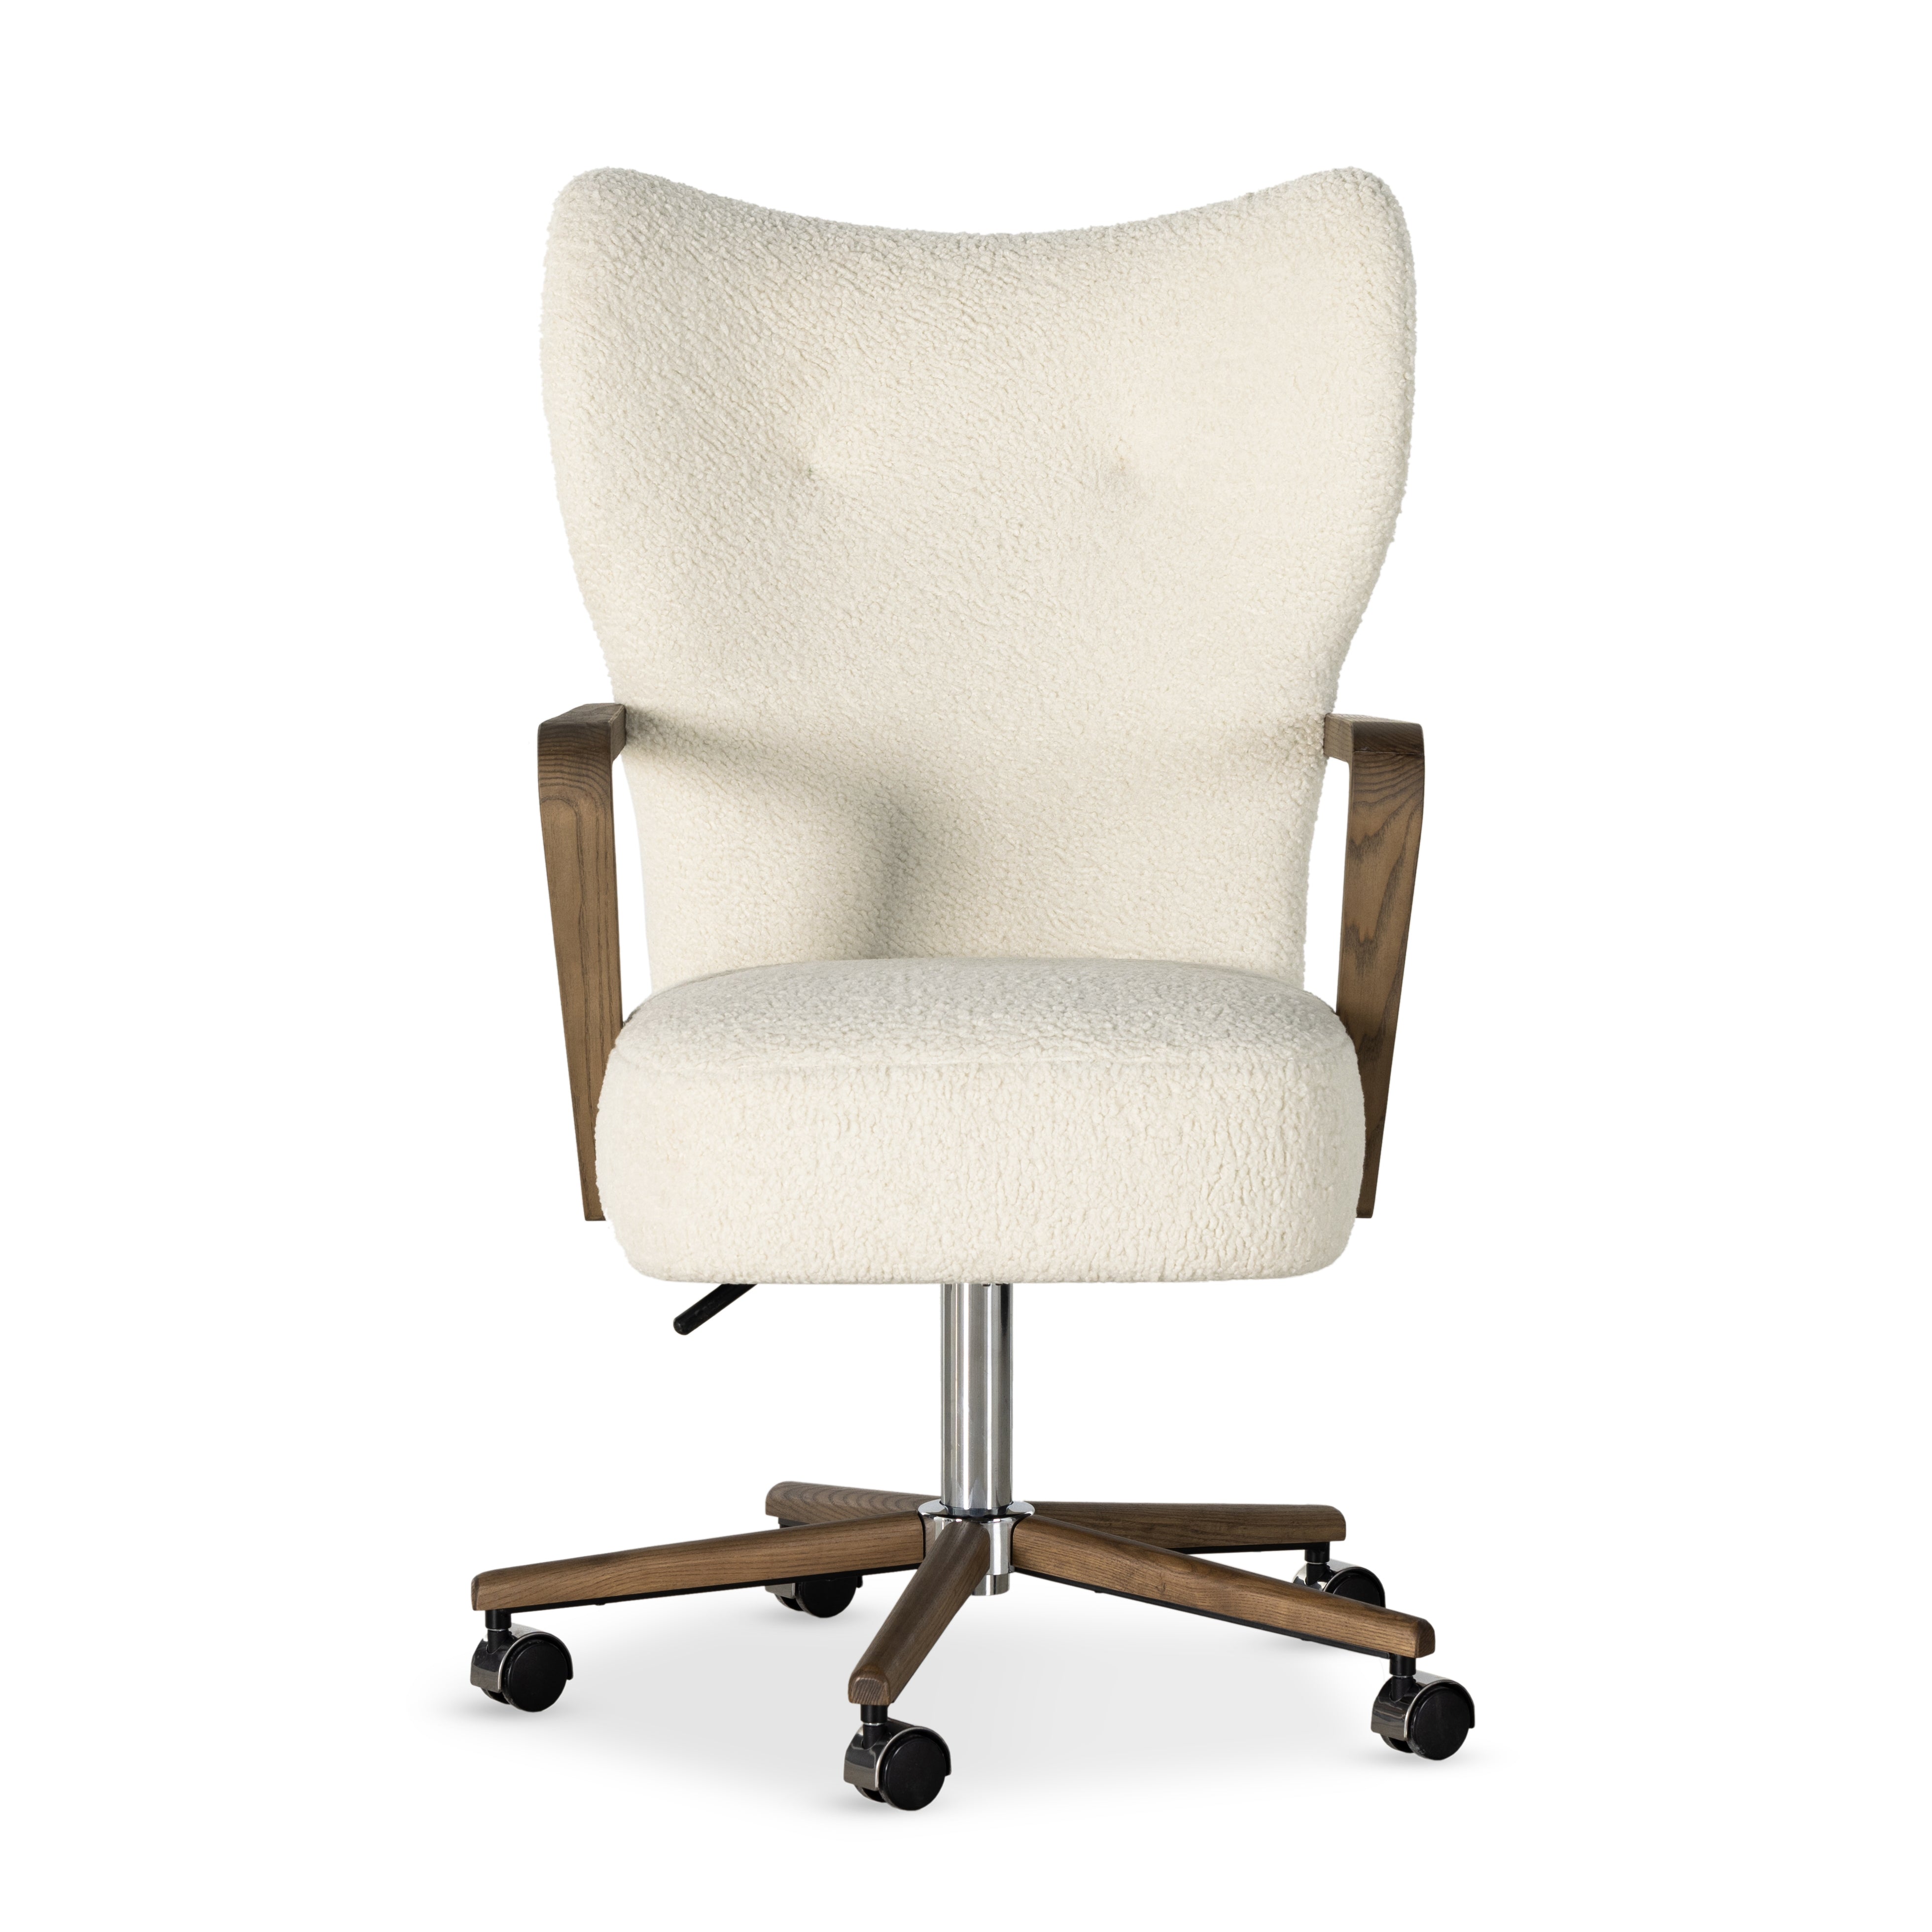 A comfort-driven desk chair features soft, textural upholstery, framed by solid ash arms. A height-adjustable swivel base with casters makes for ease in the modern office. Amethyst Home provides interior design, new home construction design consulting, vintage area rugs, and lighting in the Salt Lake City metro area.